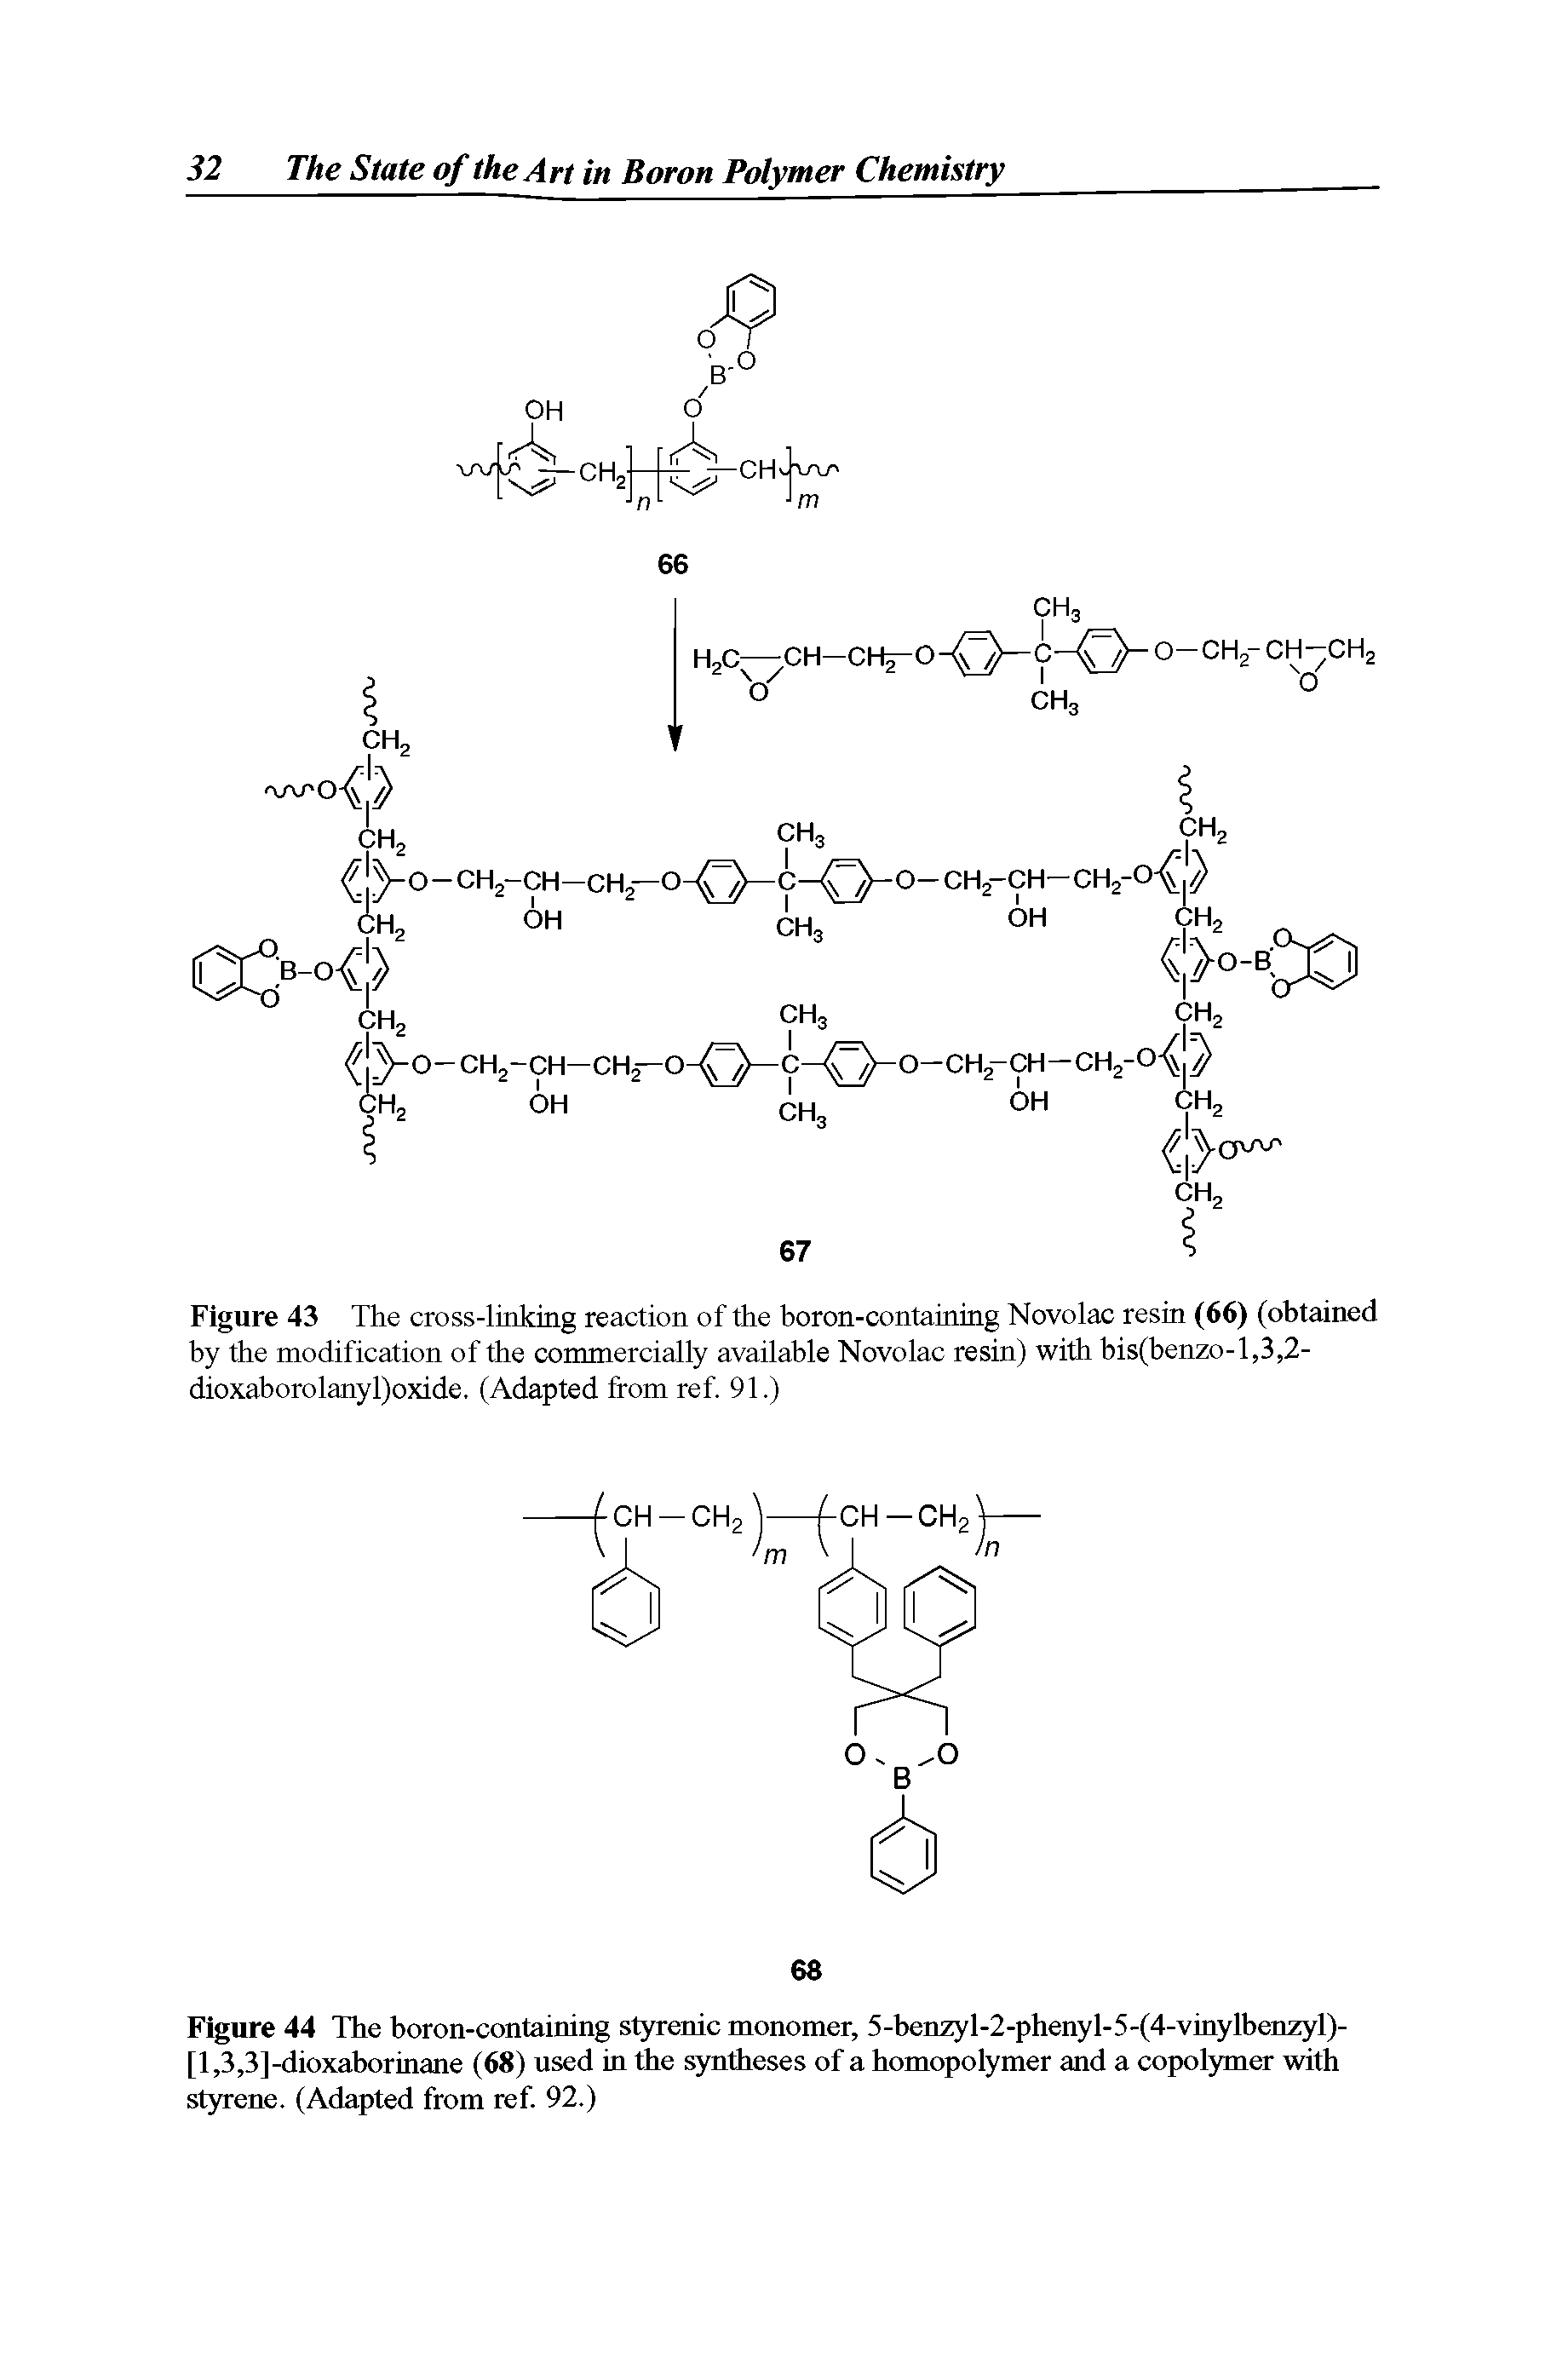 Figure 43 The cross-linking reaction of the boron-containing Novolac resin (66) (obtained by the modification of the commercially available Novolac resin) with bis(benzo-l,3,2-dioxaborolanyl)oxide. (Adapted from ref. 91.)...